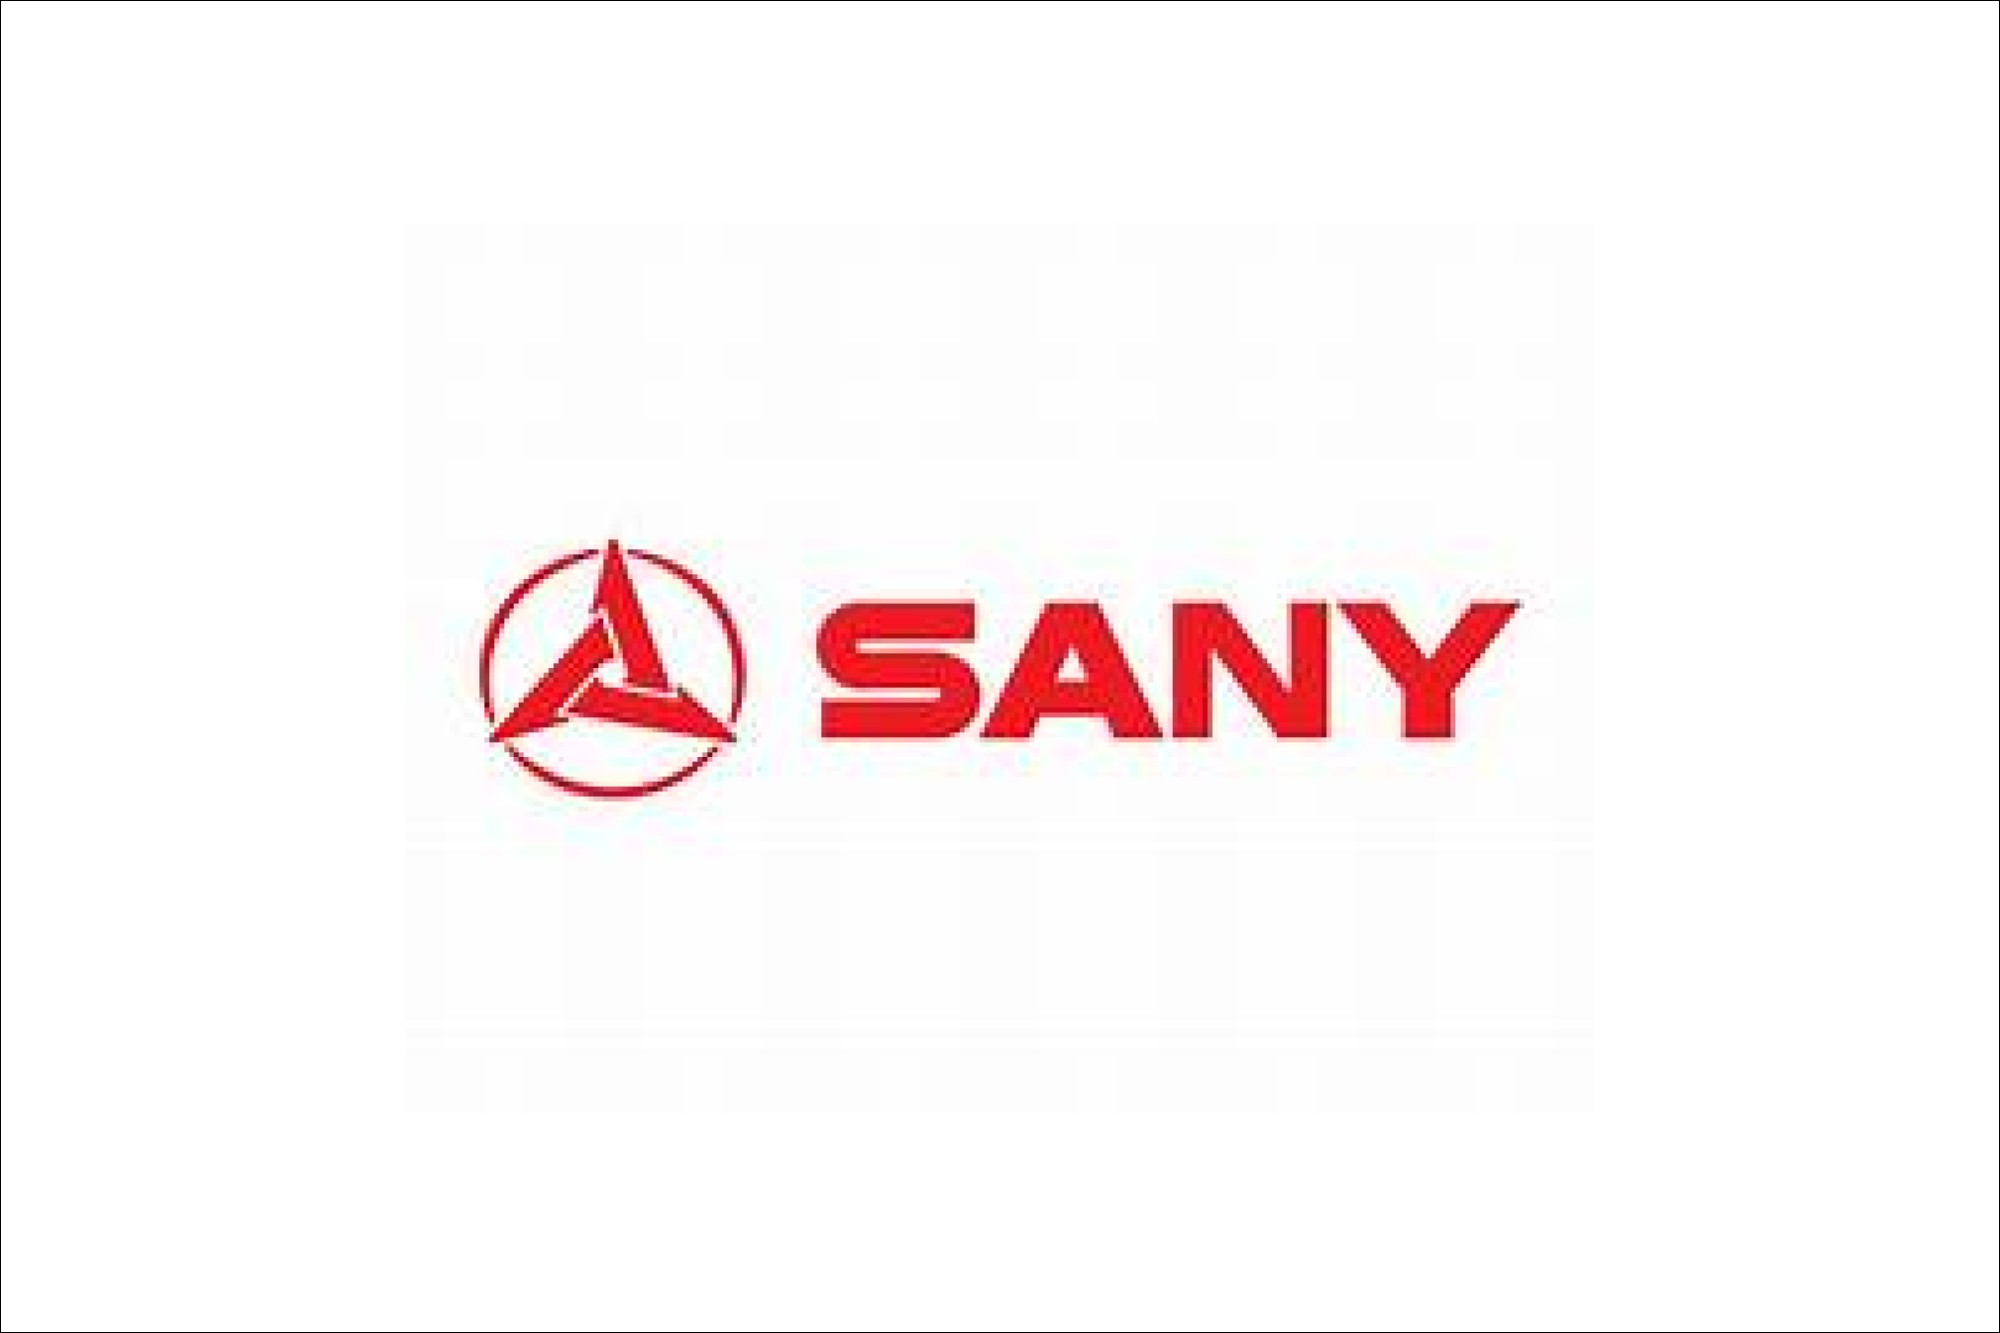 SANY India is driving India’s infrastructure development